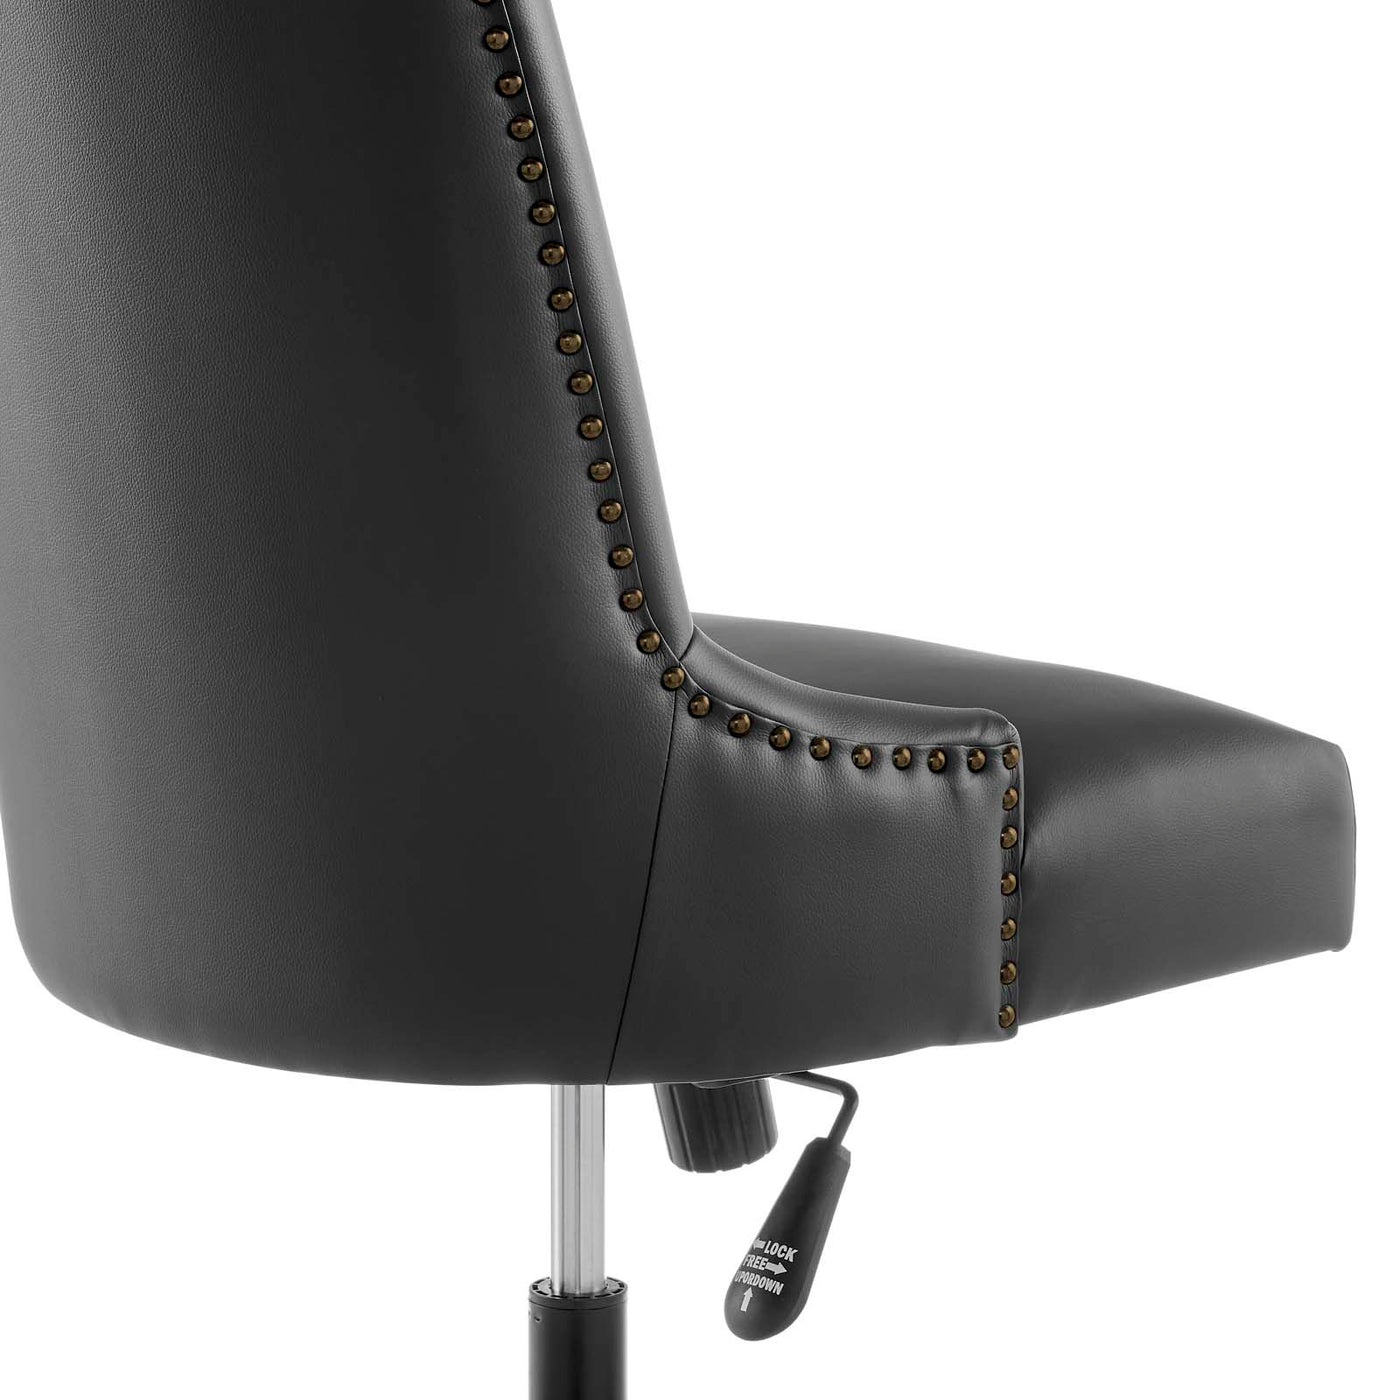 Empower Channel Tufted Vegan Leather Office Chair